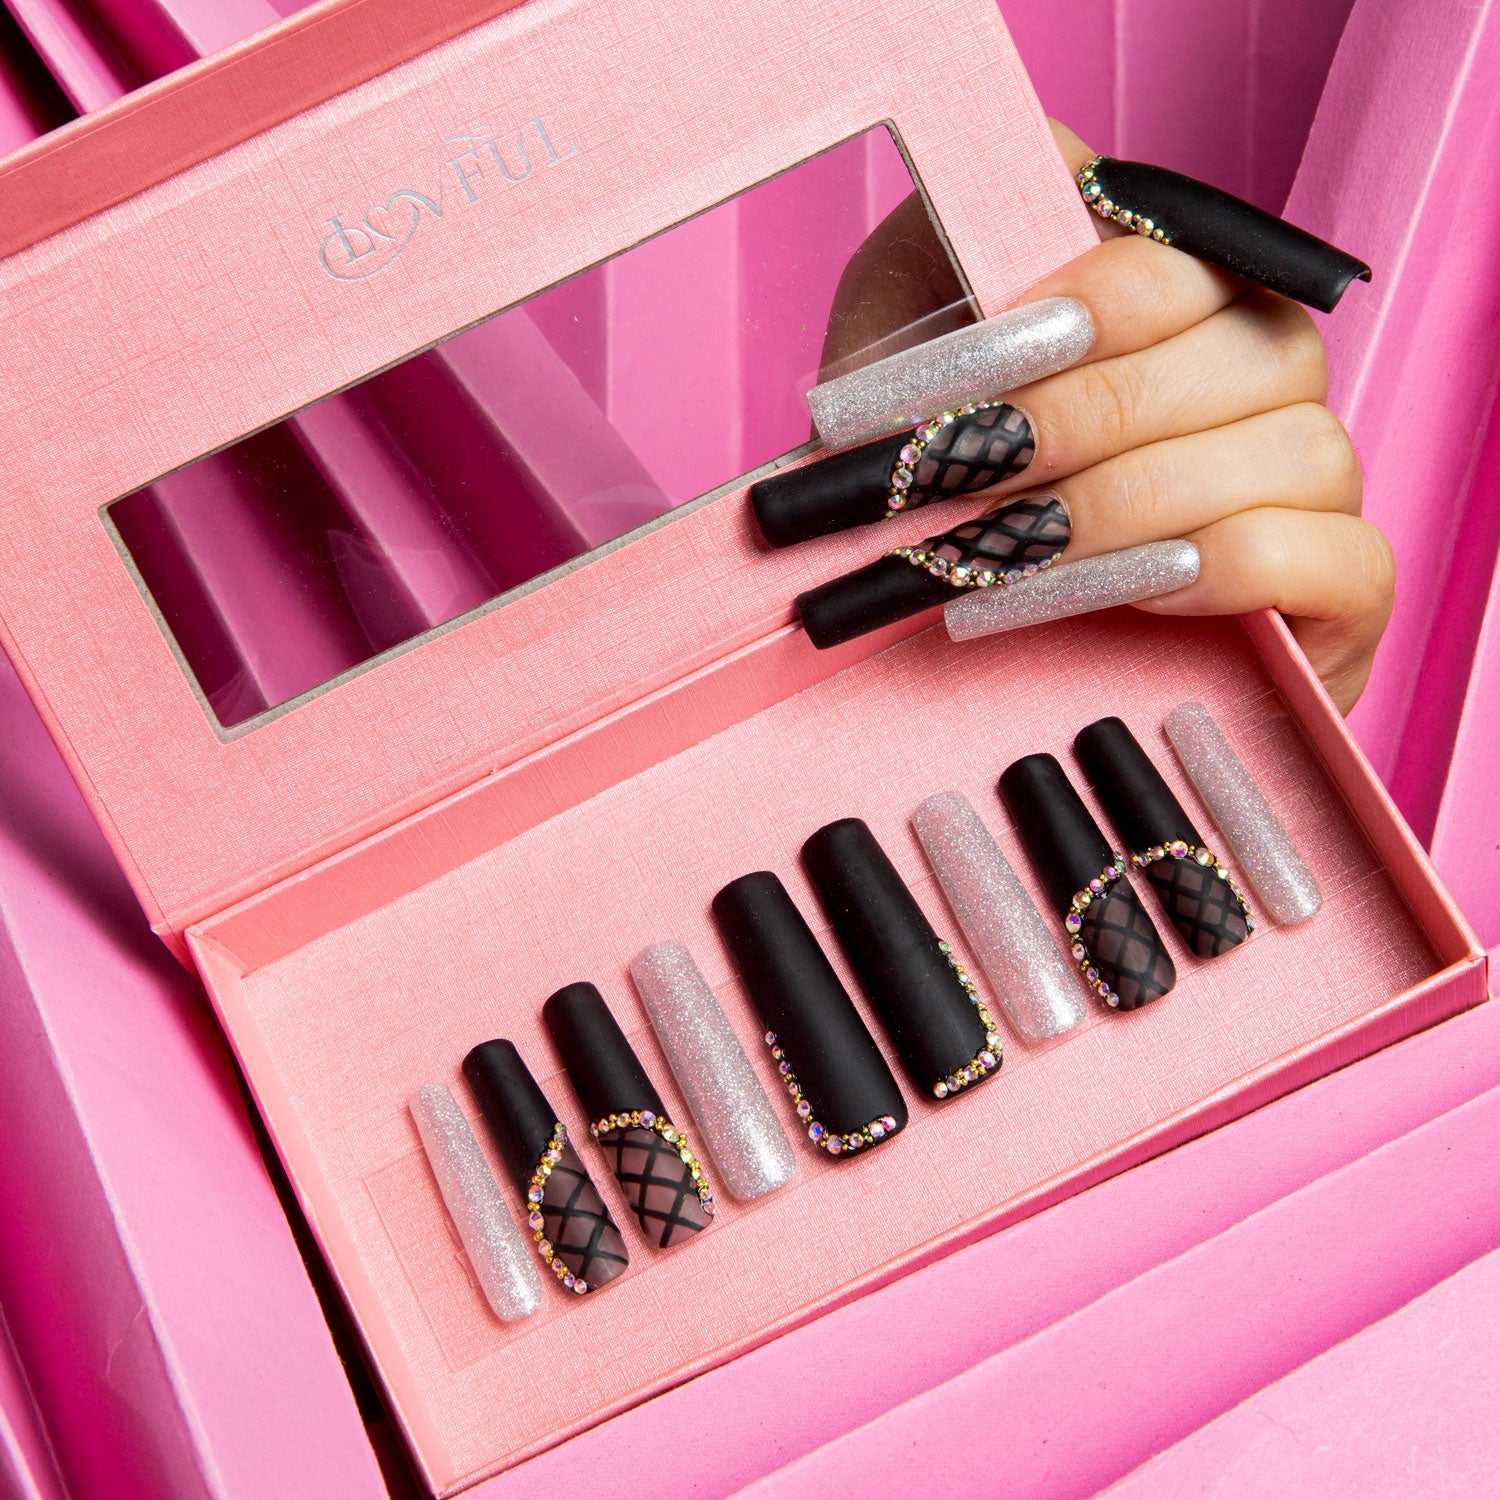 Set of Lovful H114 Black Lace Square press-on nails in a pink box. The nails feature black designs with silver shimmer, lace decor, and rhinestone accents. A hand with matching nails is holding the box.